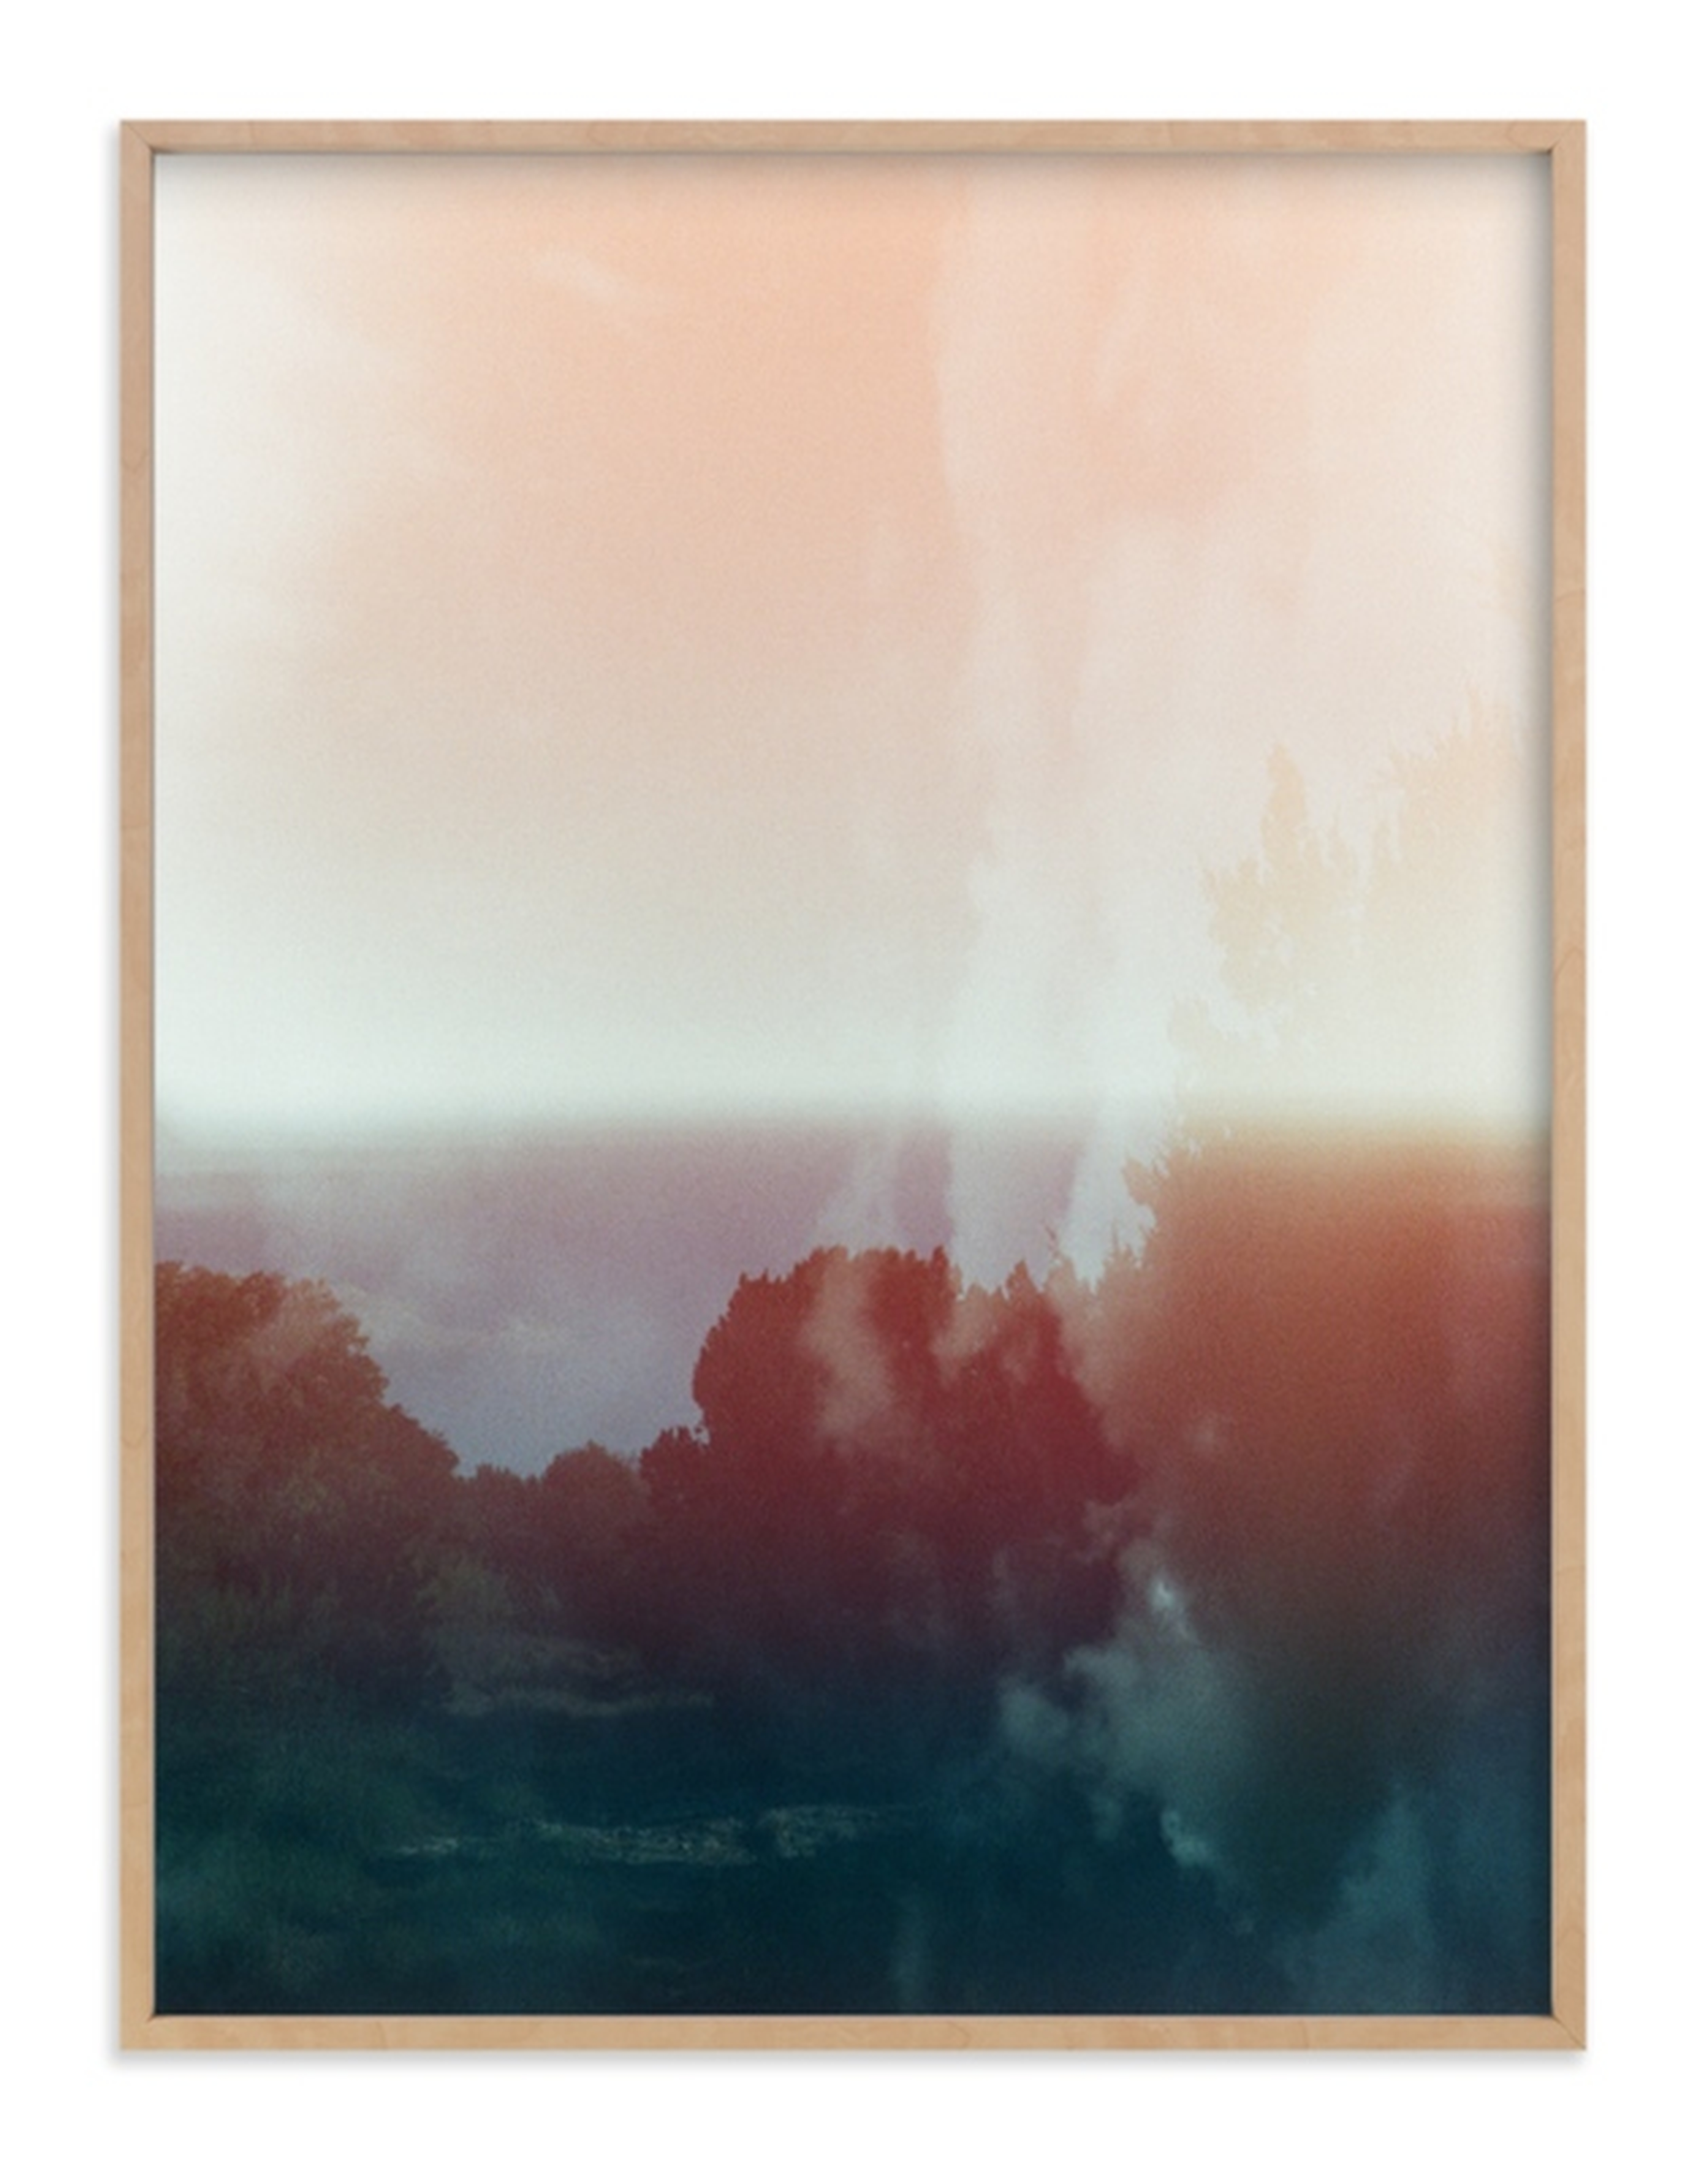 paradise for the soul by sasquatch mansfield - 30x40 with natural raw wood frame - Minted